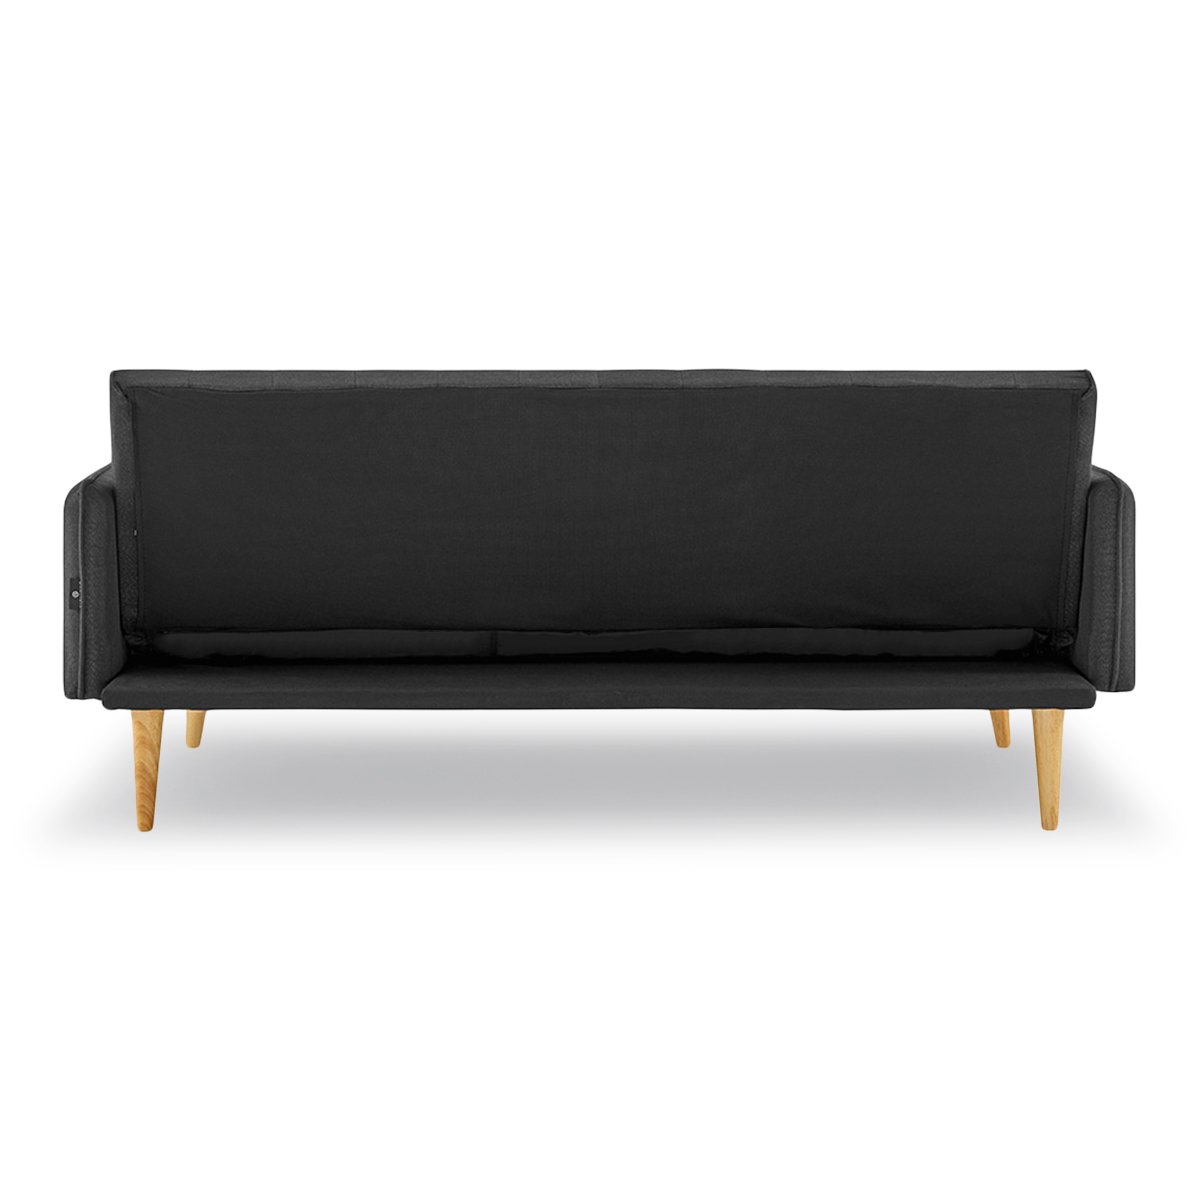 indoor furniture 3 Seater Modular Linen Fabric Sofa Bed Couch - Black